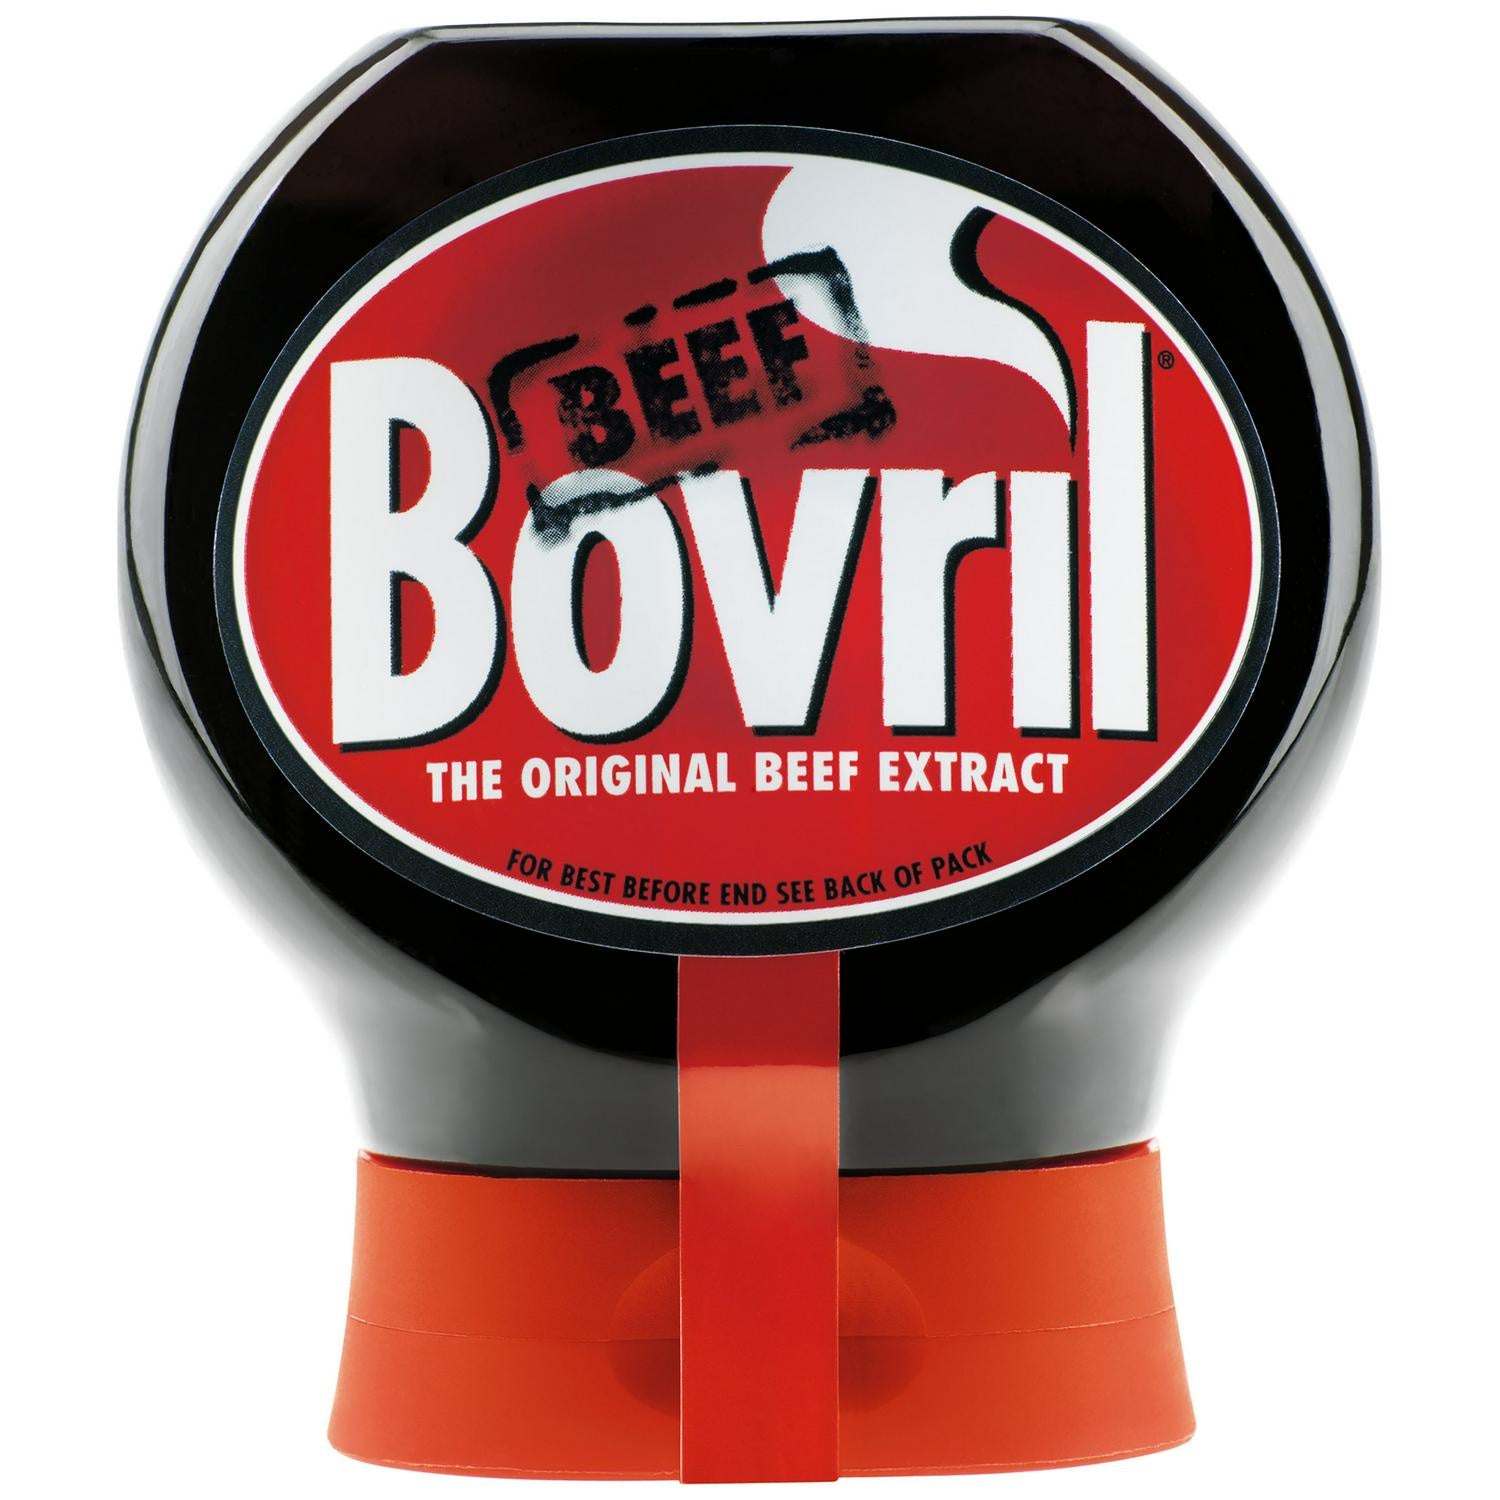 Bovril Beef Extract Squeezy 200g